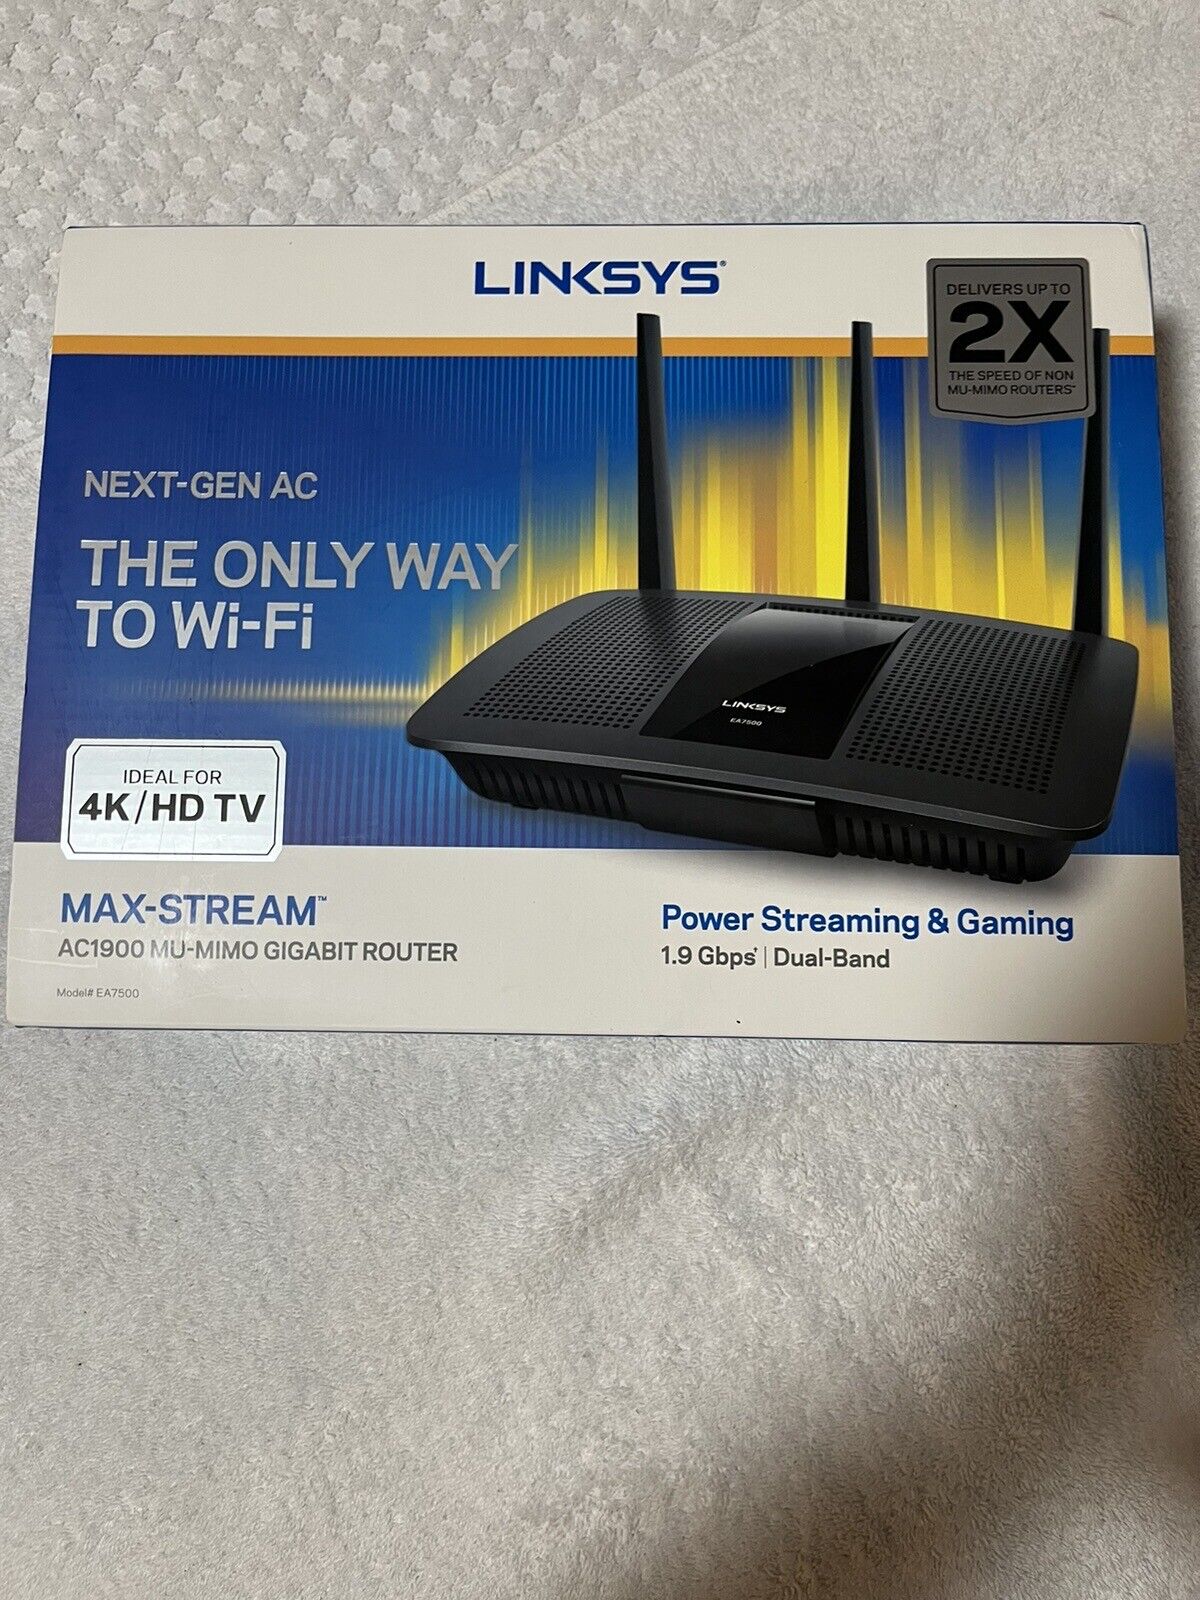 Linksys EA7500 AC1900 Max Stream MU-MIMO Wi-Fi Router For Streaming & Gaming